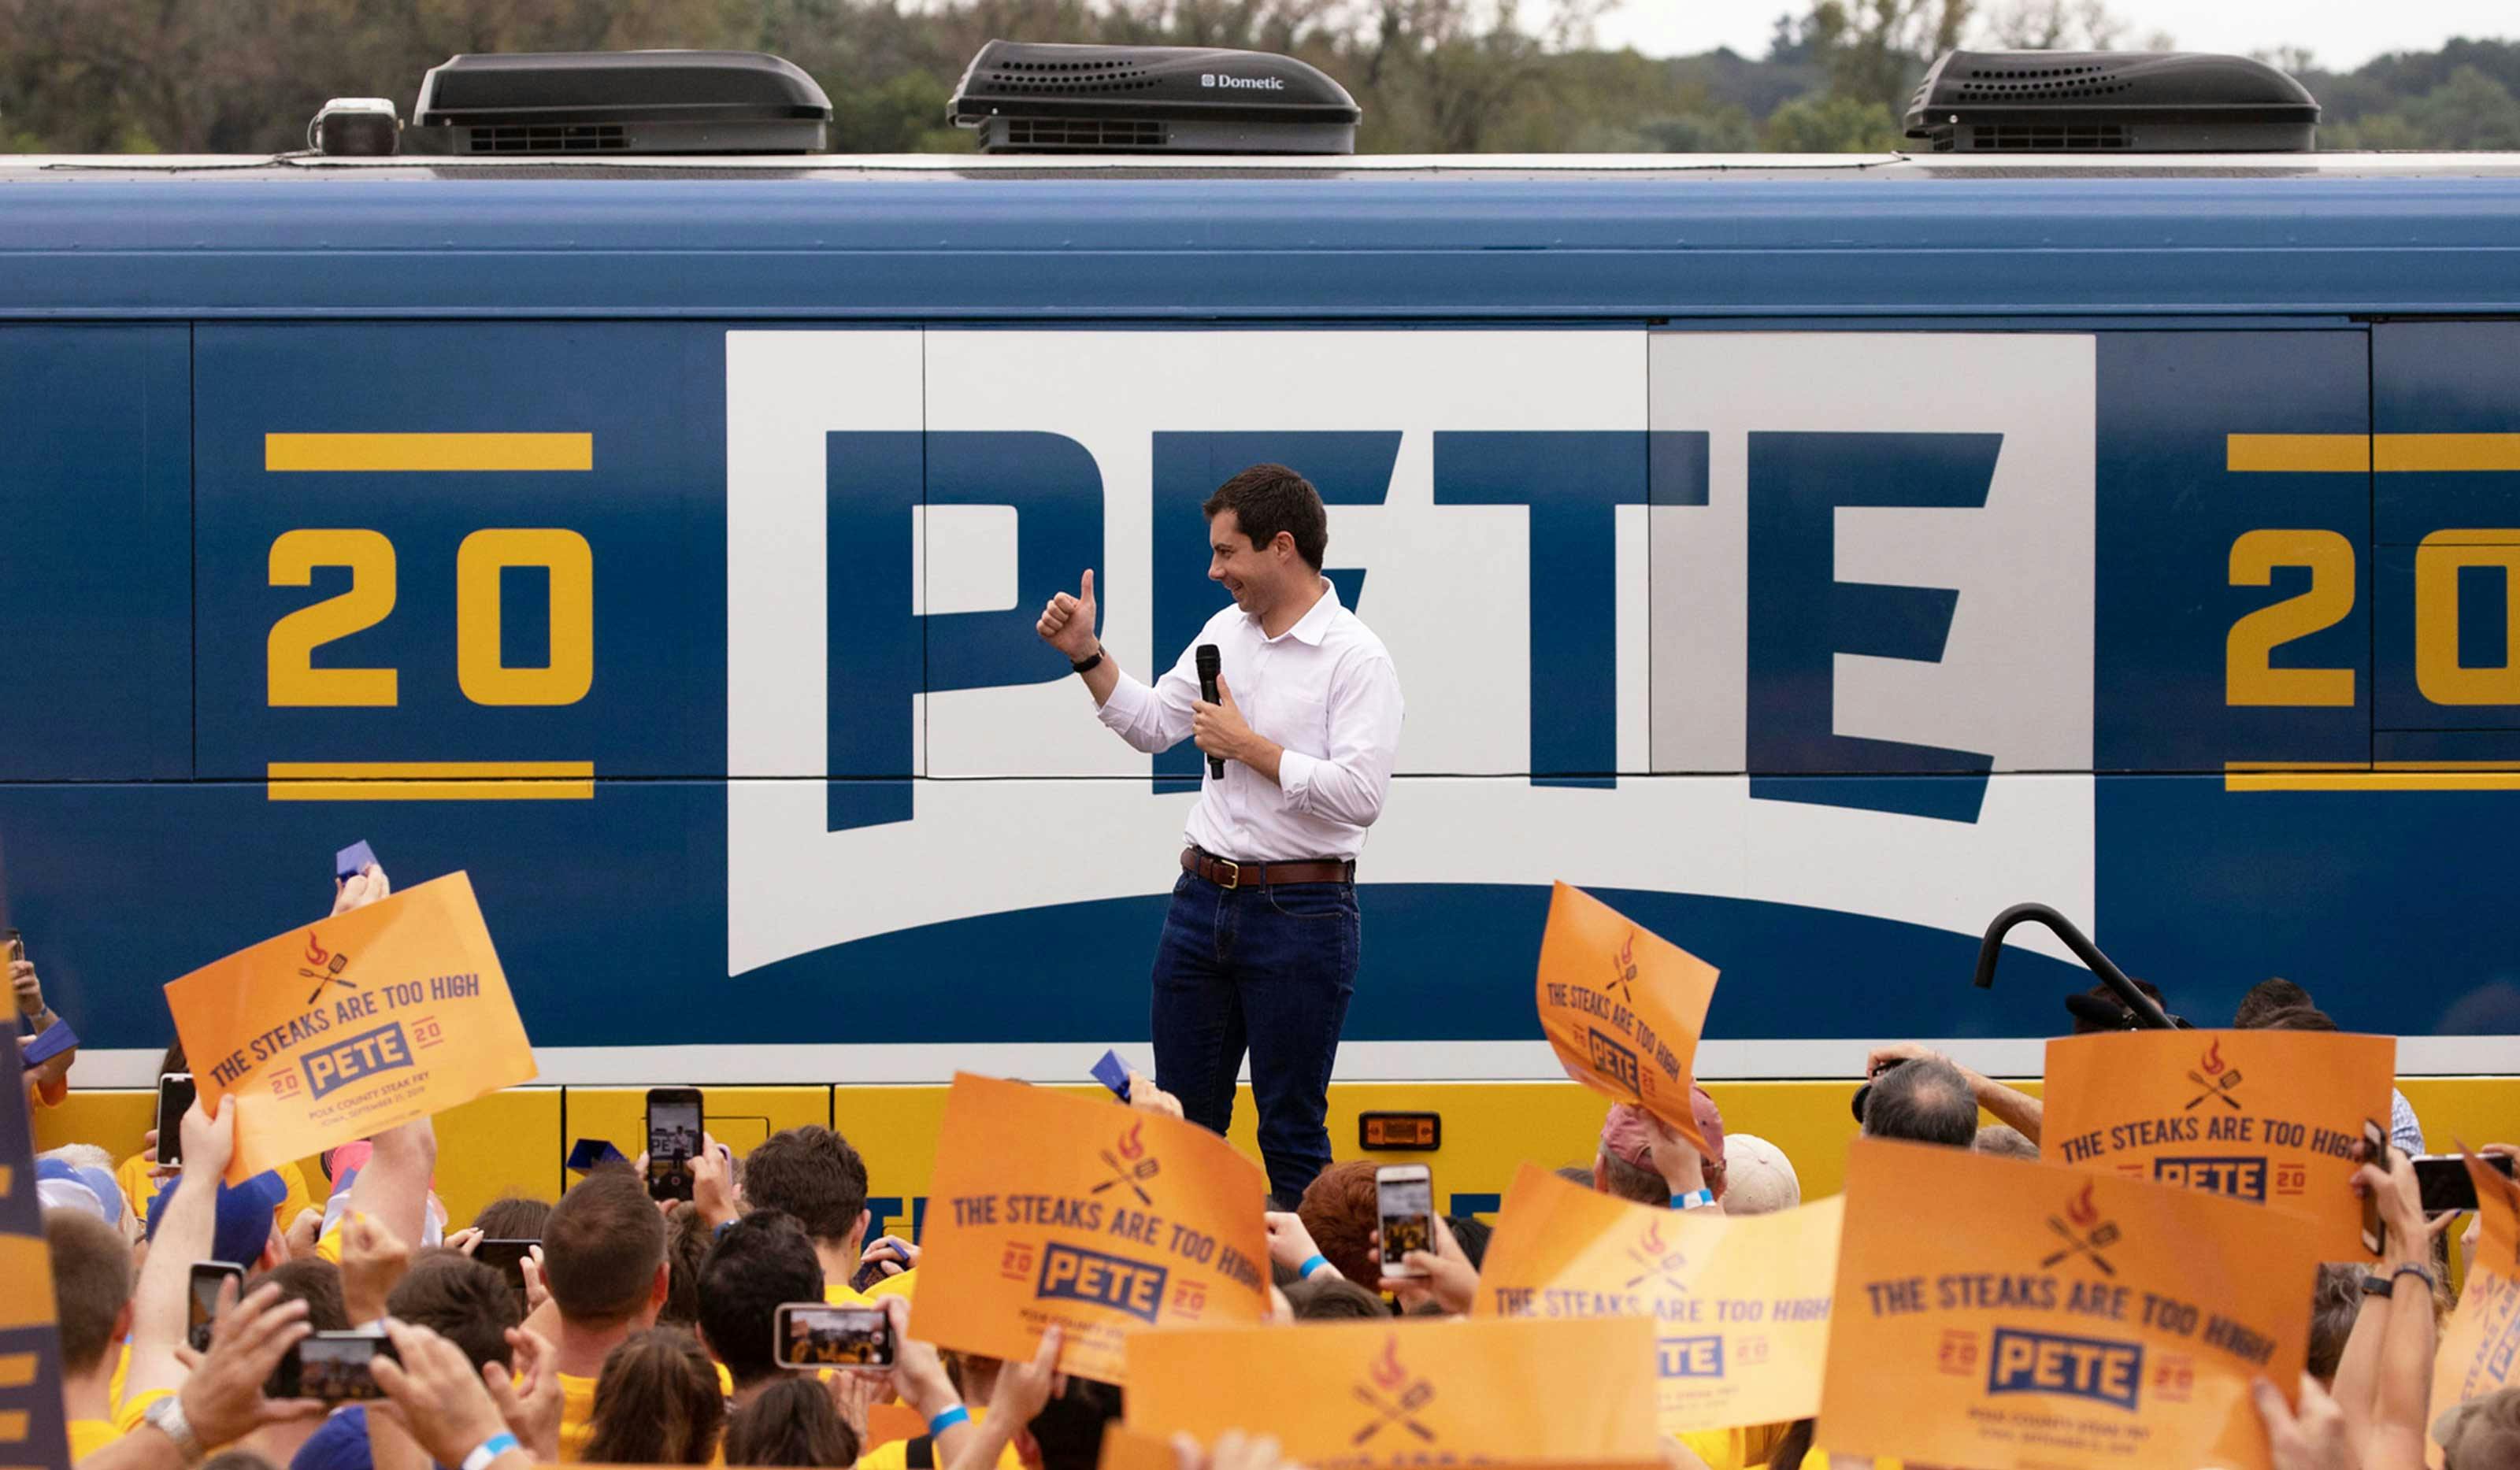 Pete-Buttigieg-in-front-of-campaign-bus-with-logo-on-it-and-crowd-ahead-cheering.jpg